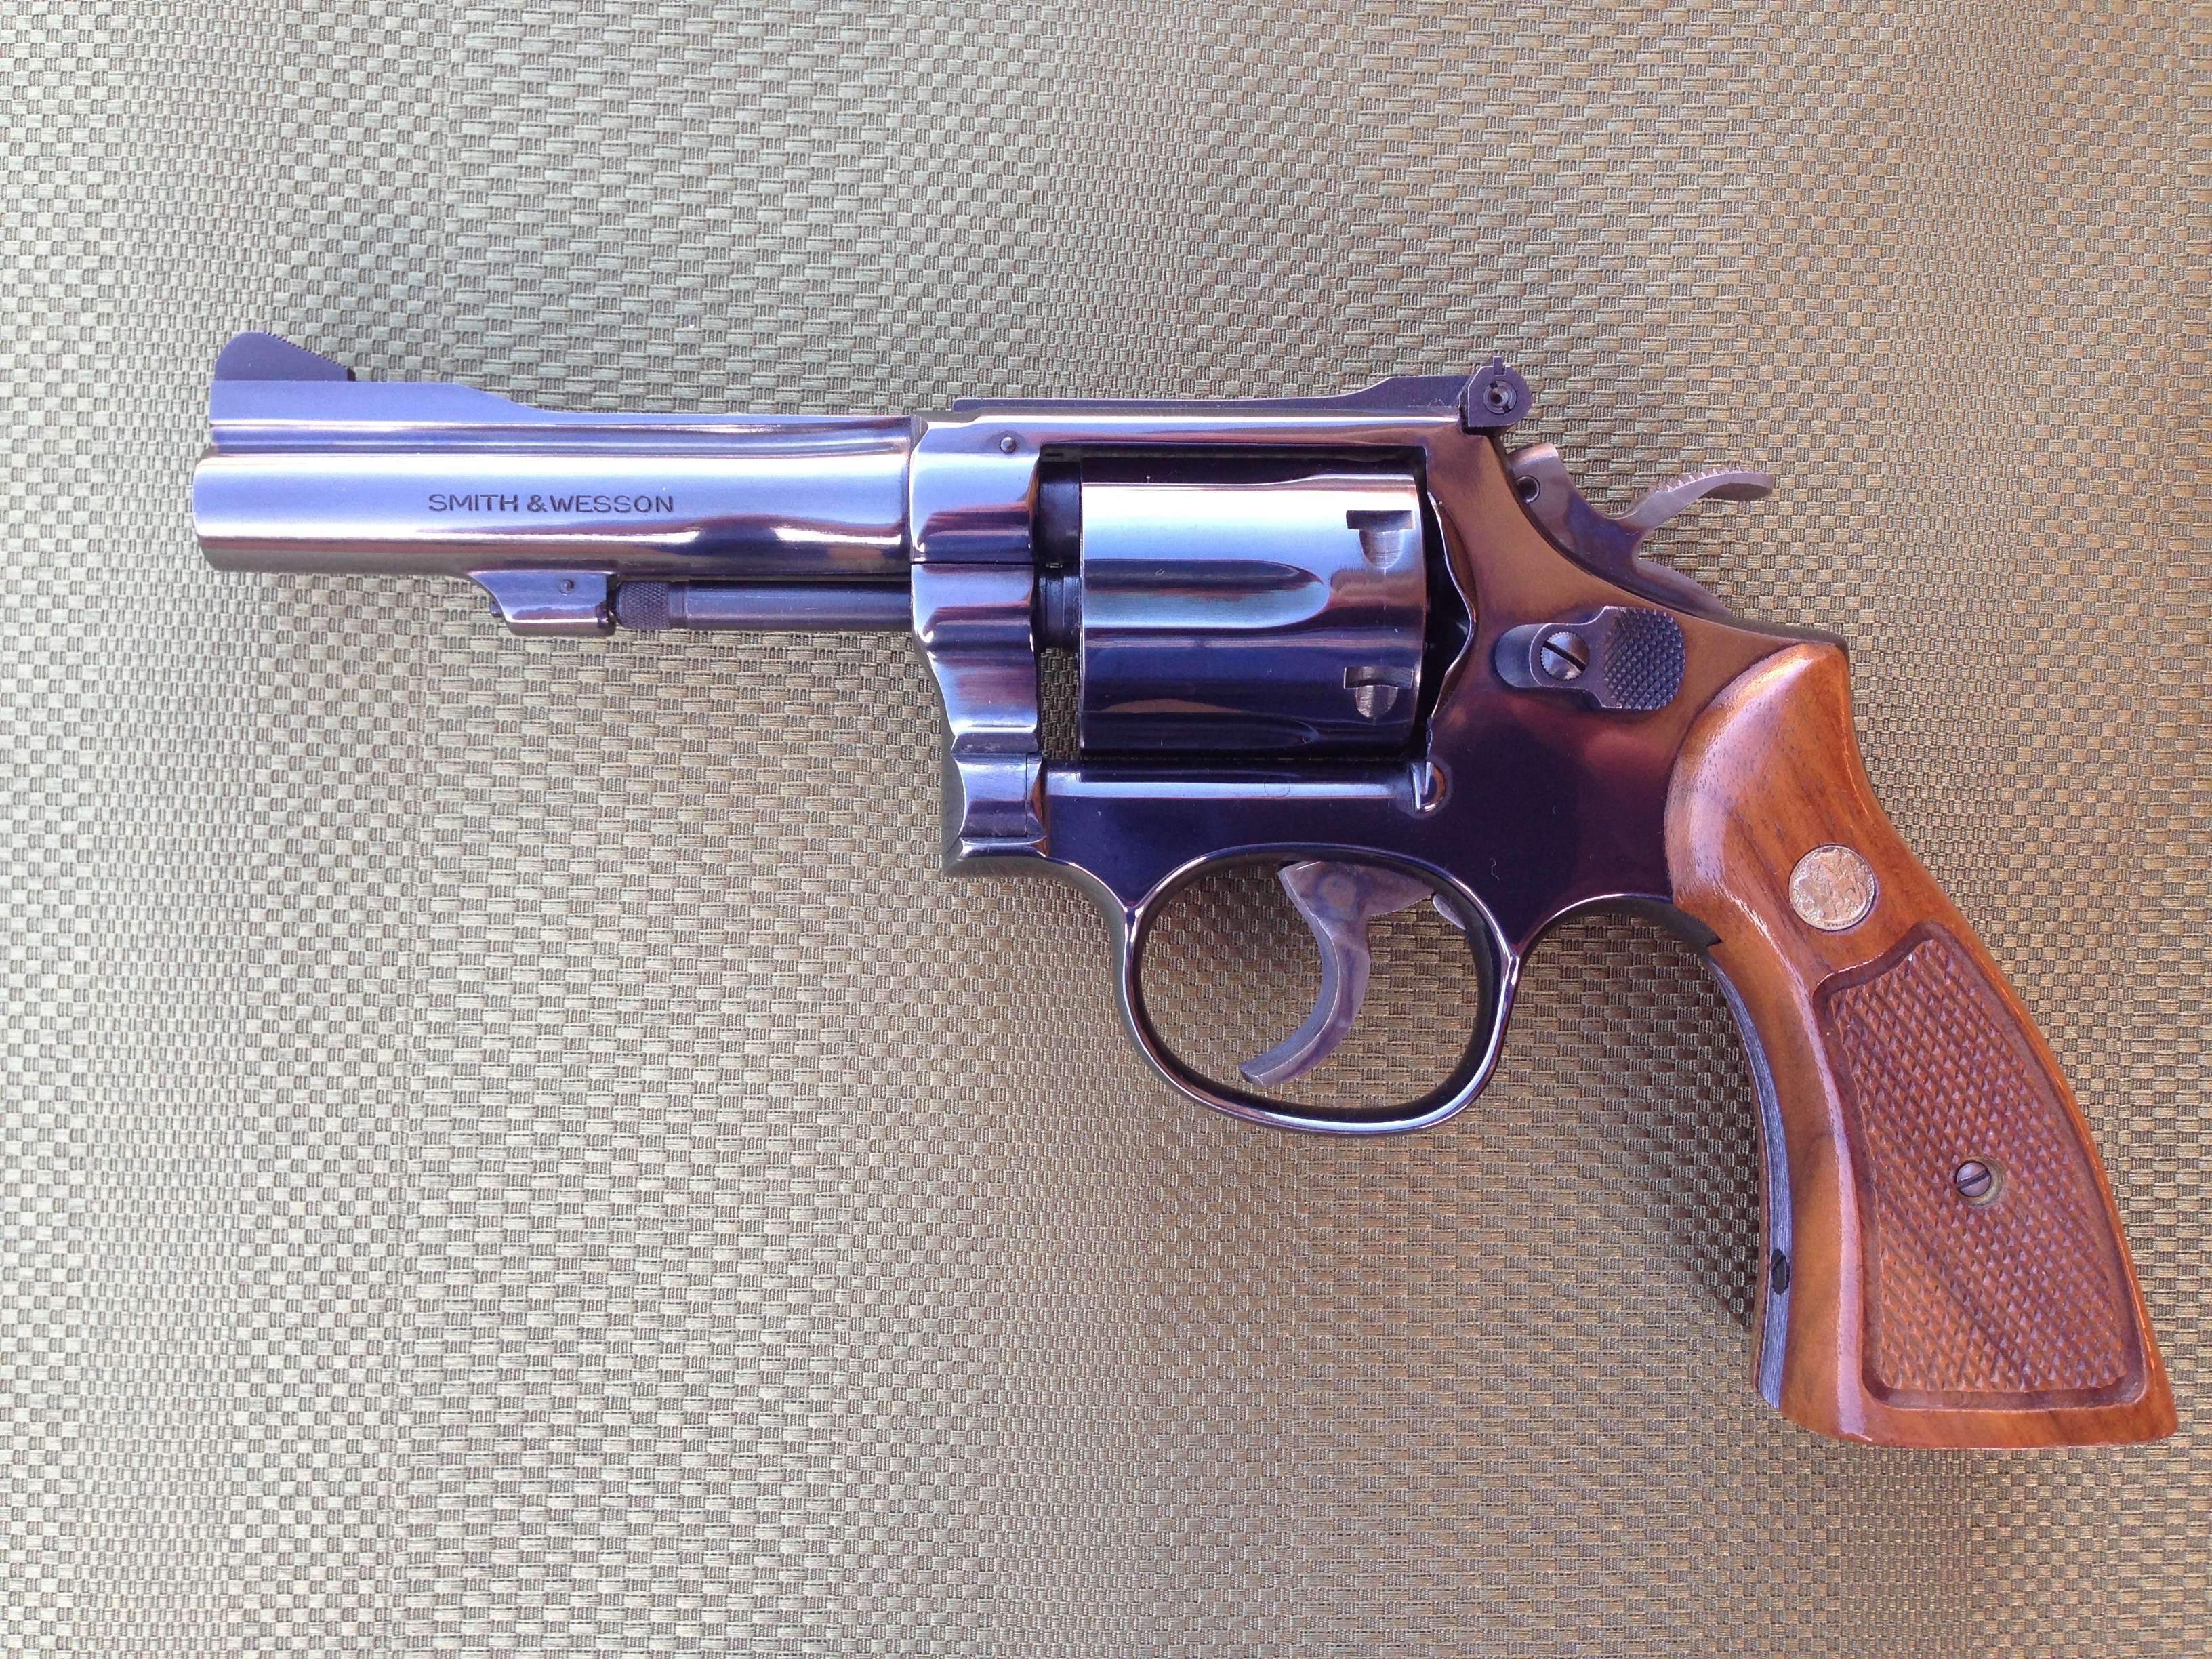 Smith and wesson serial number lookup model 41